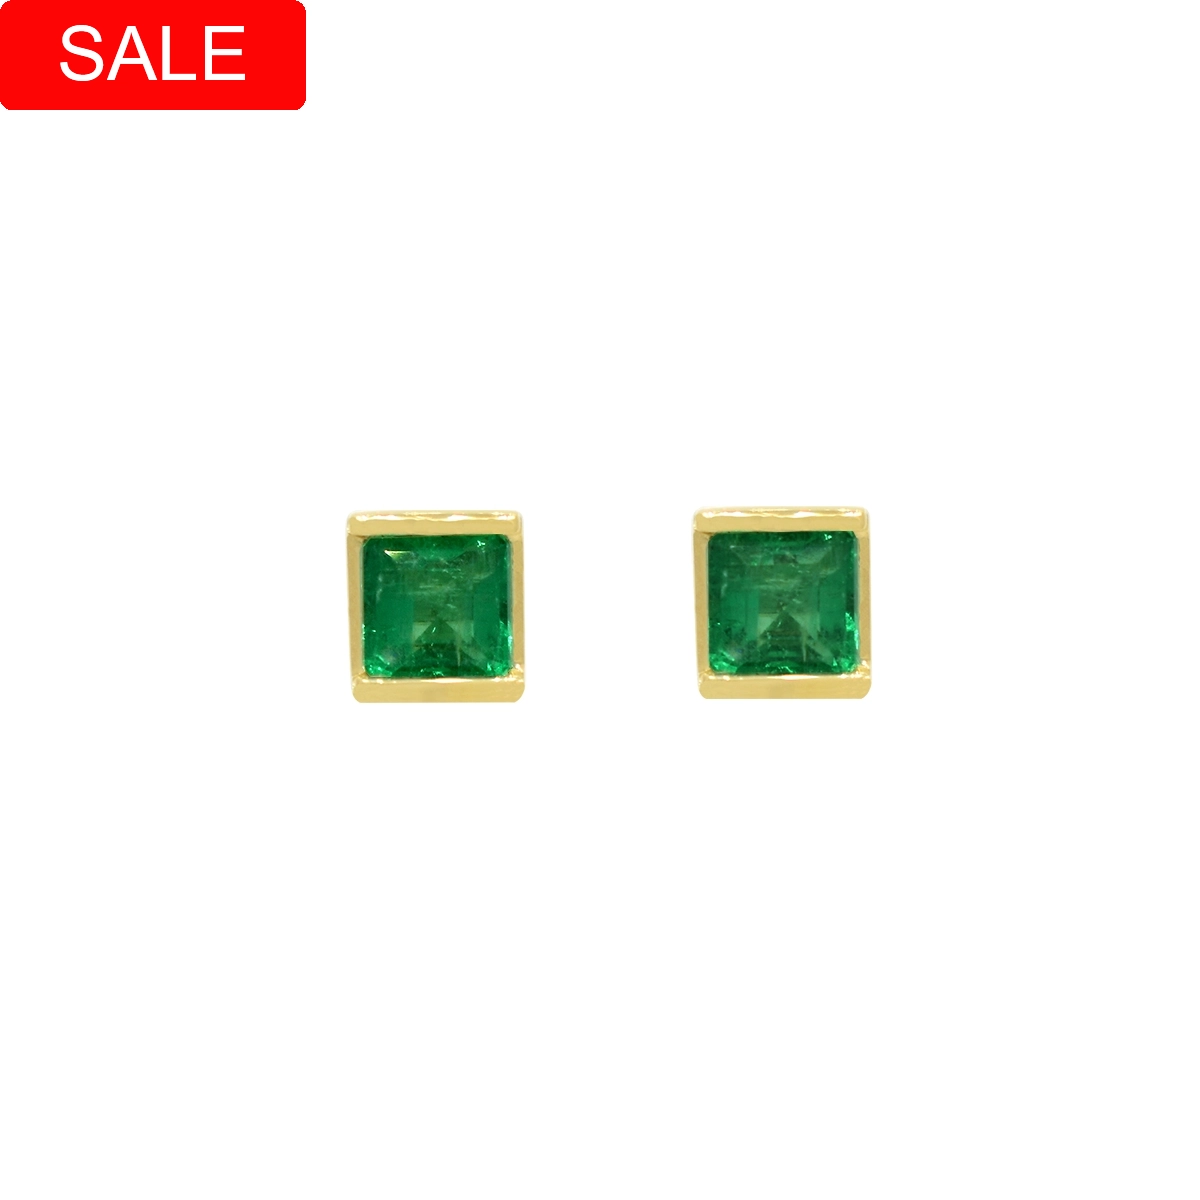 Emerald stud earrings with 2 emerald-cut natural Colombian emeralds in 0.70 Ct. t.w. set in solid 18K yellow gold